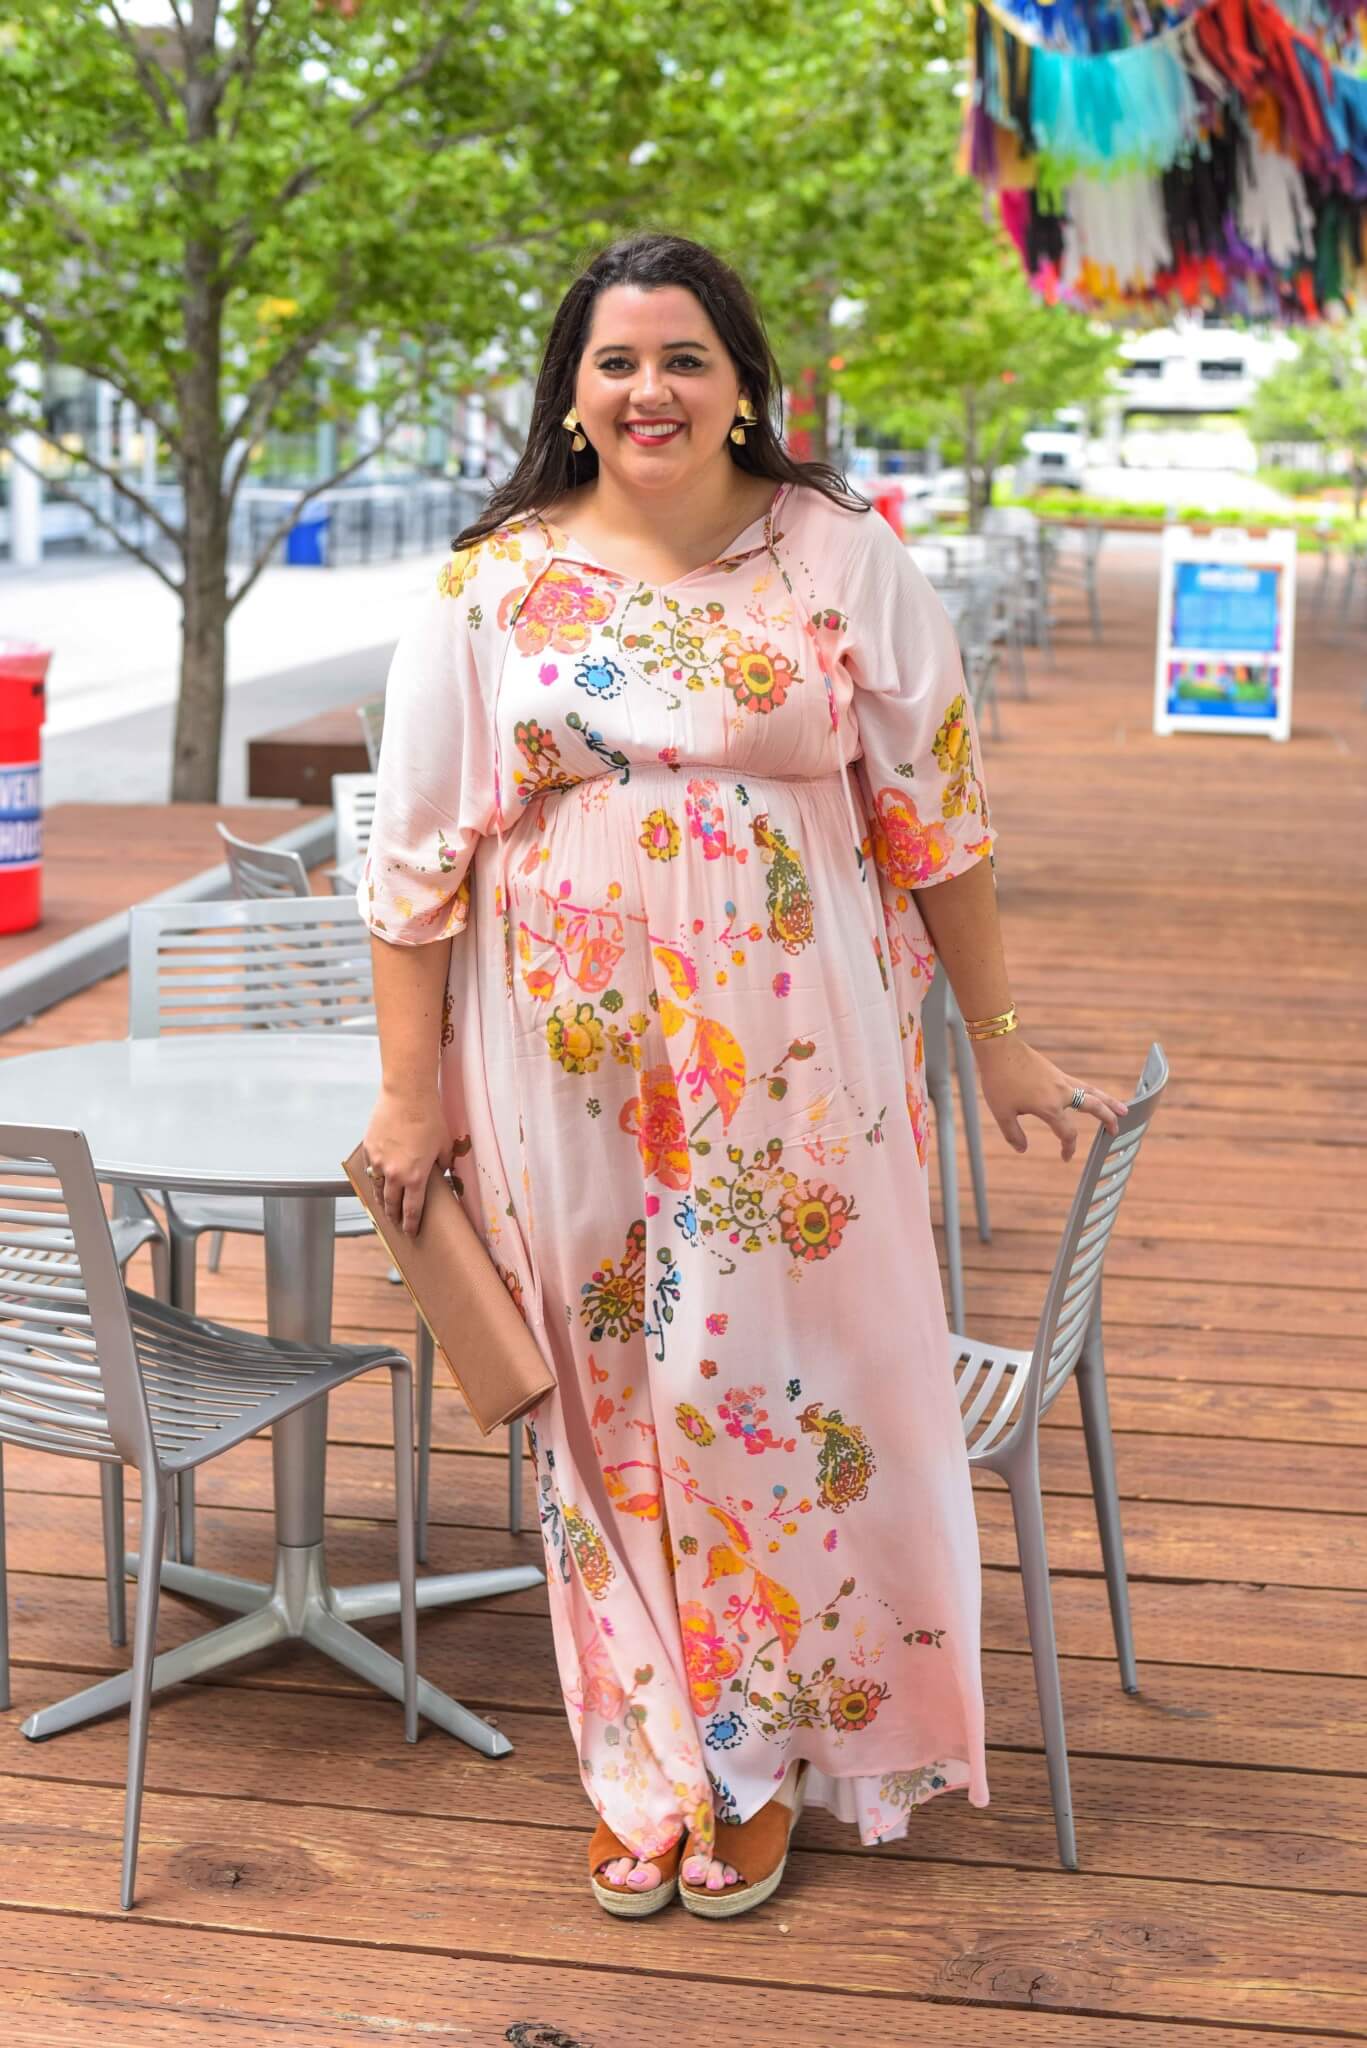 An empire waist maxi dress is extremely flattering for any plus size woman looking to flatter their midsection. The print on this Melissa McCarthy Seven7 dress is great for a summer time day exploring your hometown. - Gwynnie Bee outfit by popular Houston fashion blogger Something Gold, Something Blue